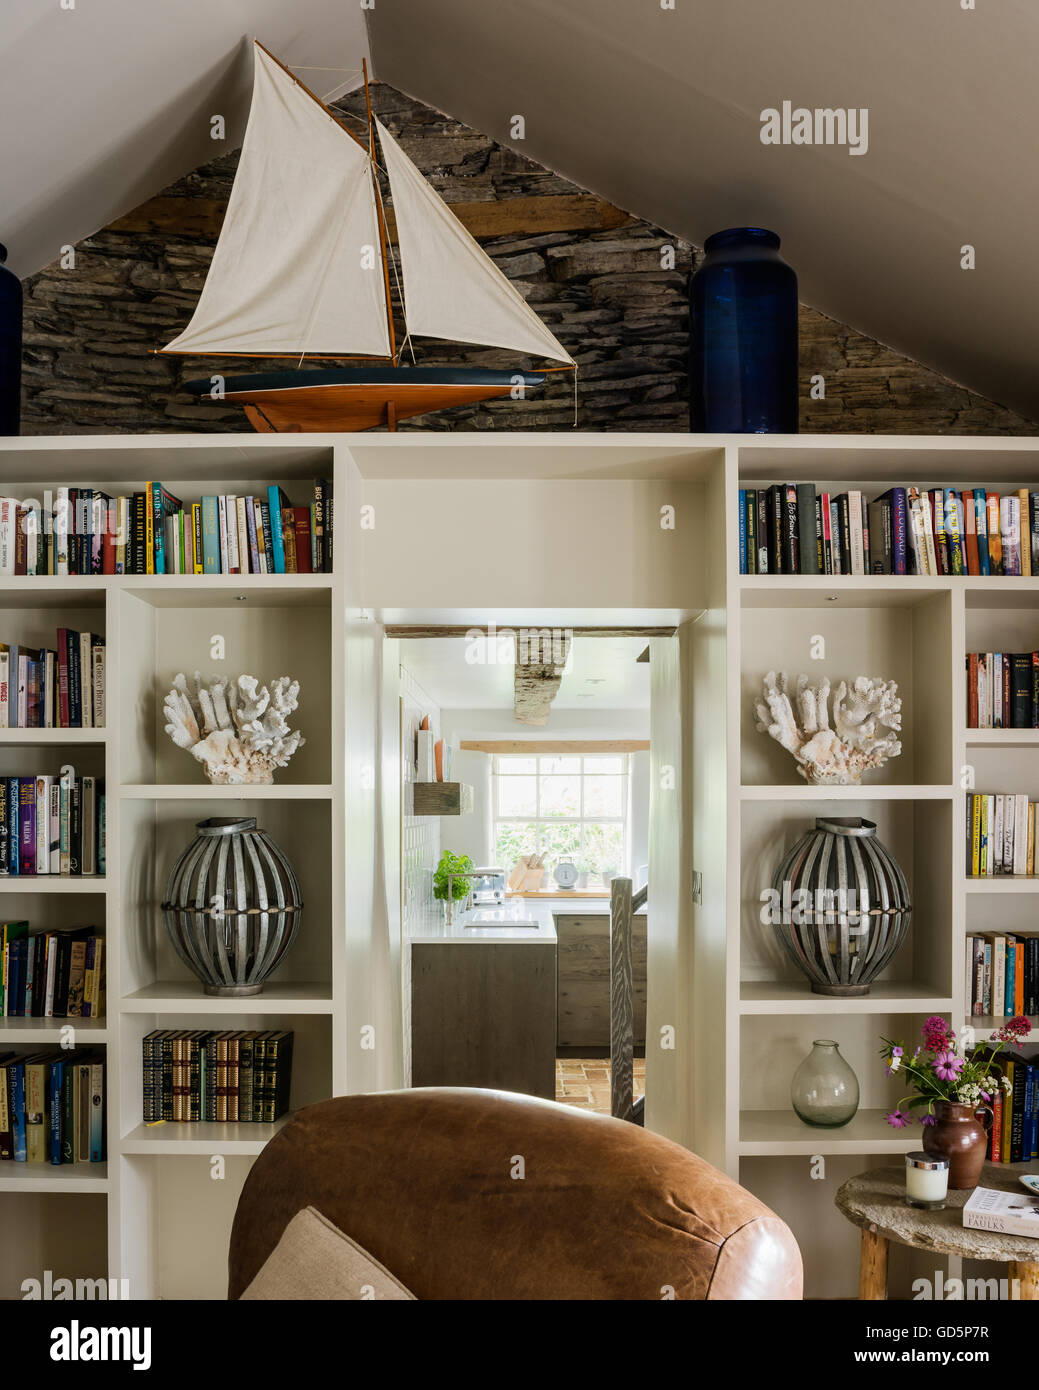 Model boat, coral and books on open shelving in sitting room Stock Photo